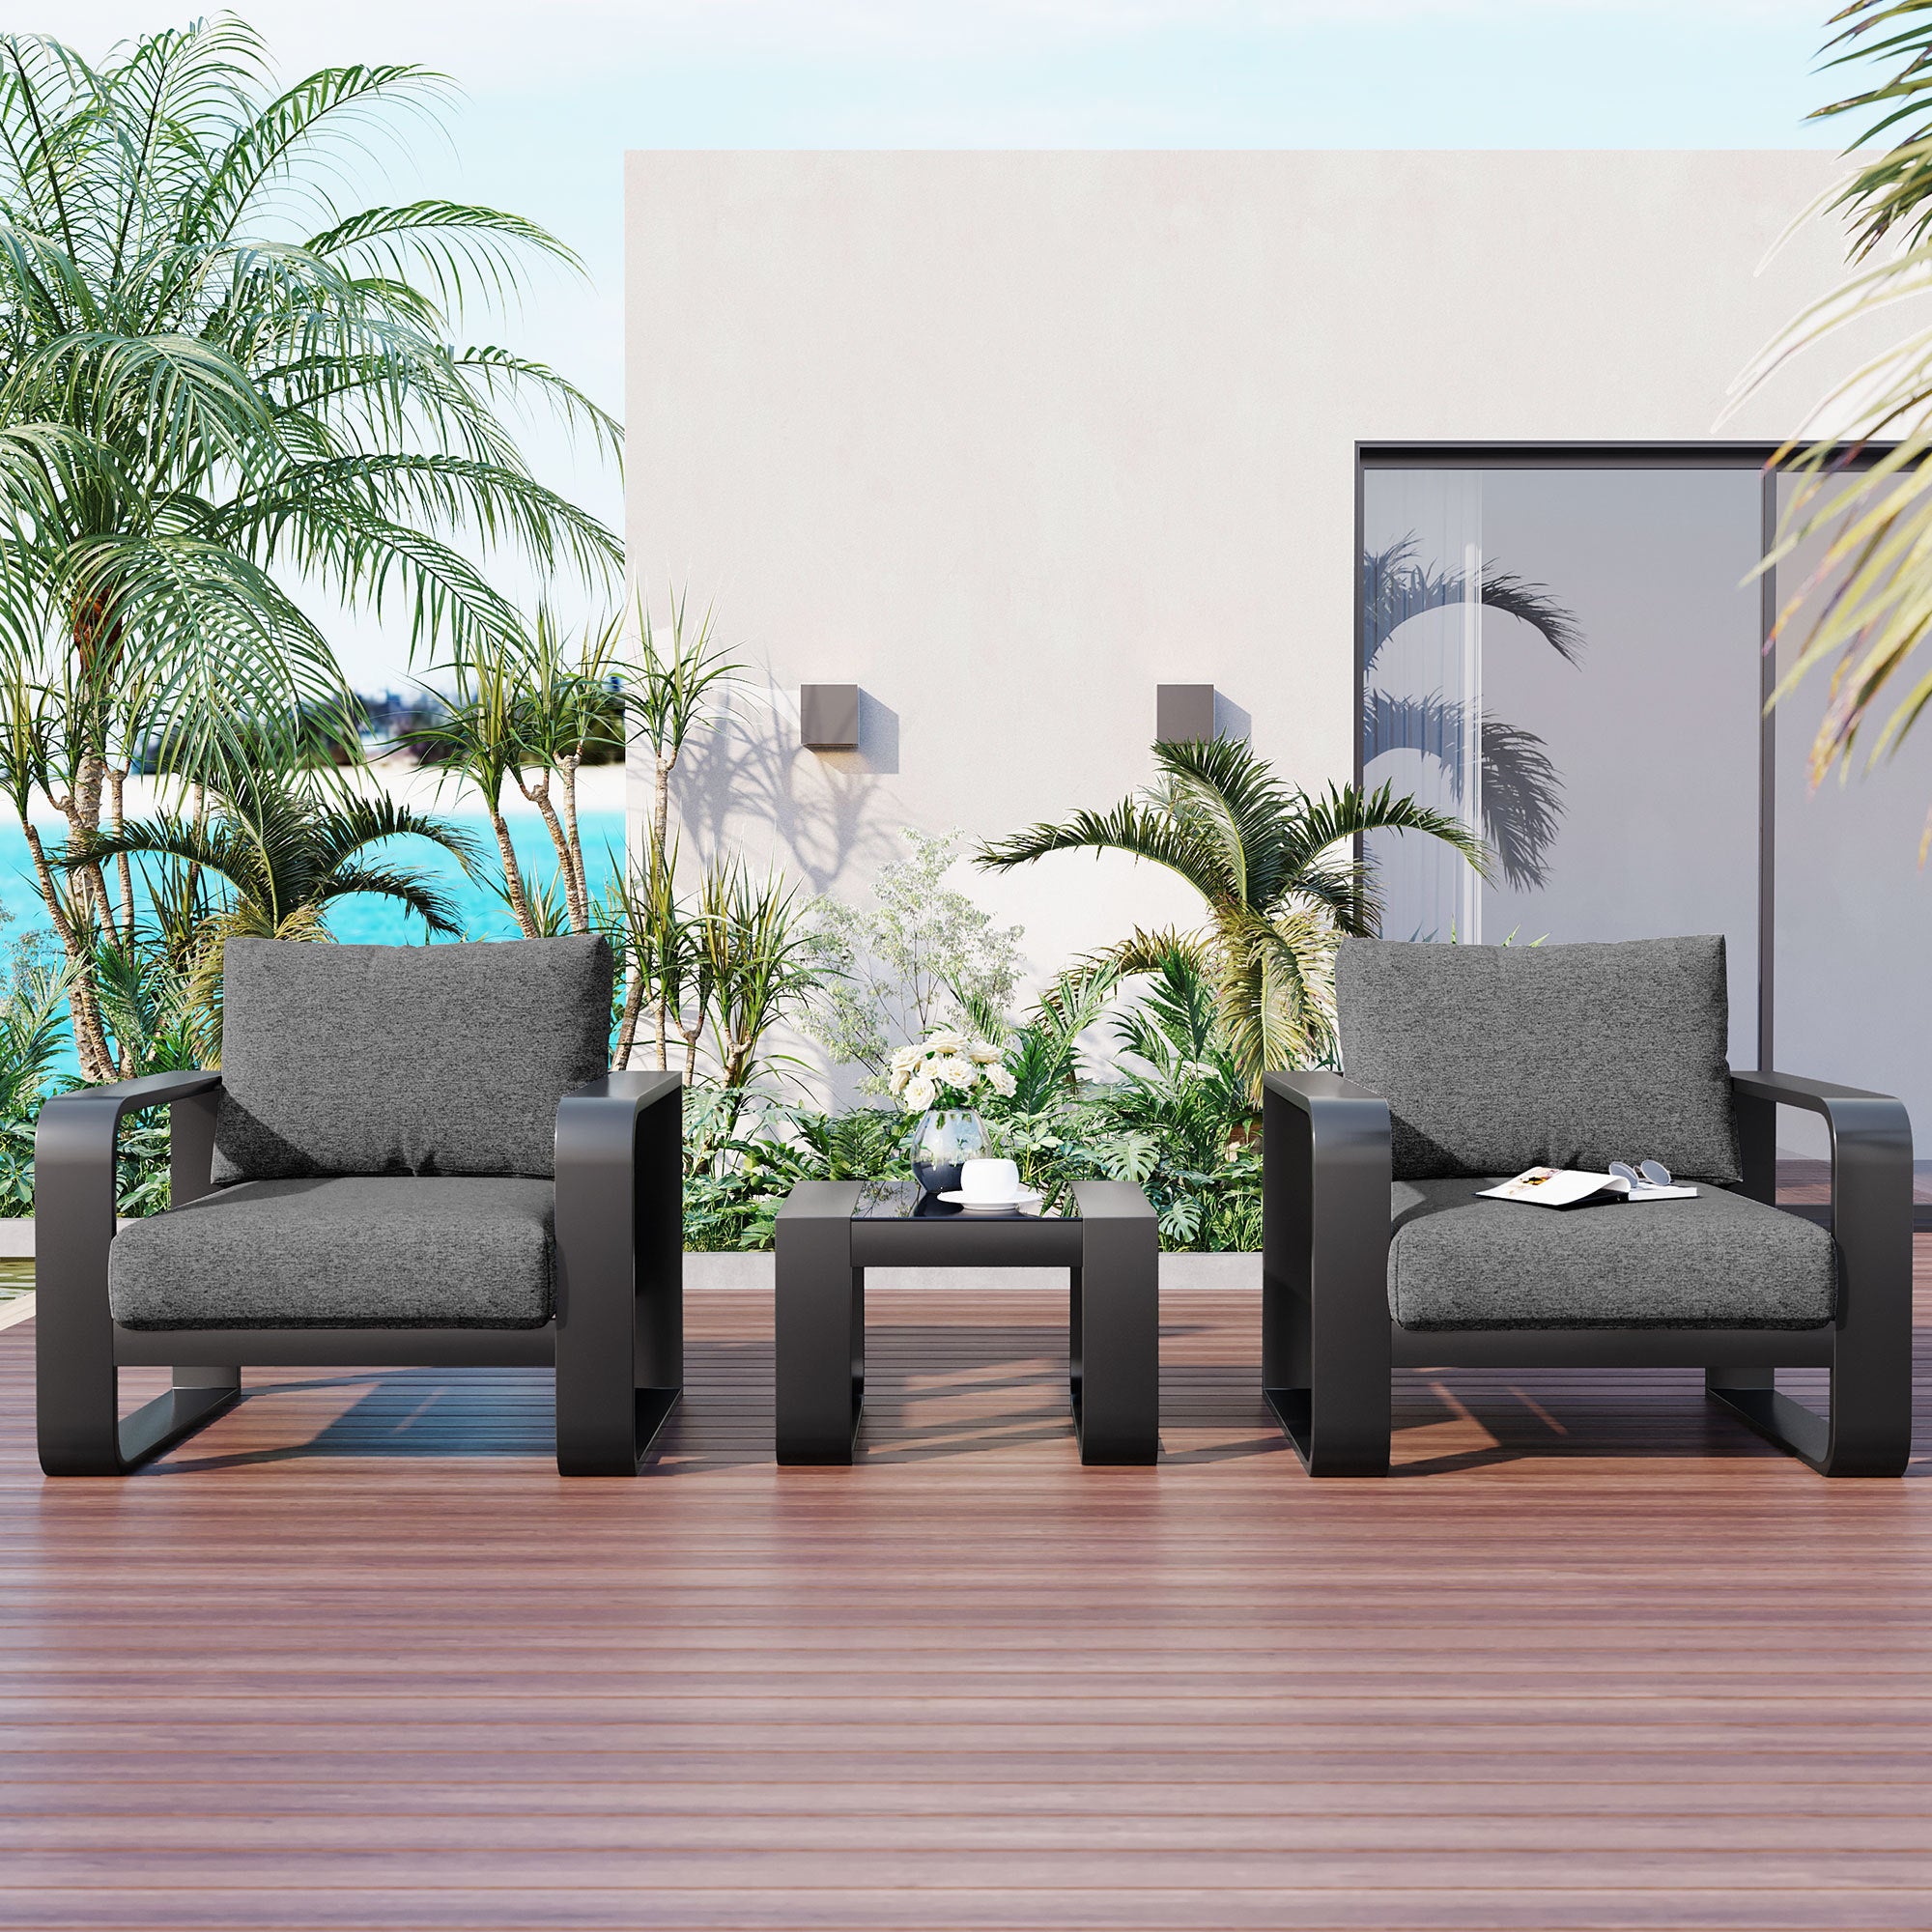 GO 3-pieces Aluminum Frame Patio Furniture With 6.7" Thick Cushion And Coffee Table, All Weather Use Olefin fabric Outdoor Chair, Gray And Black